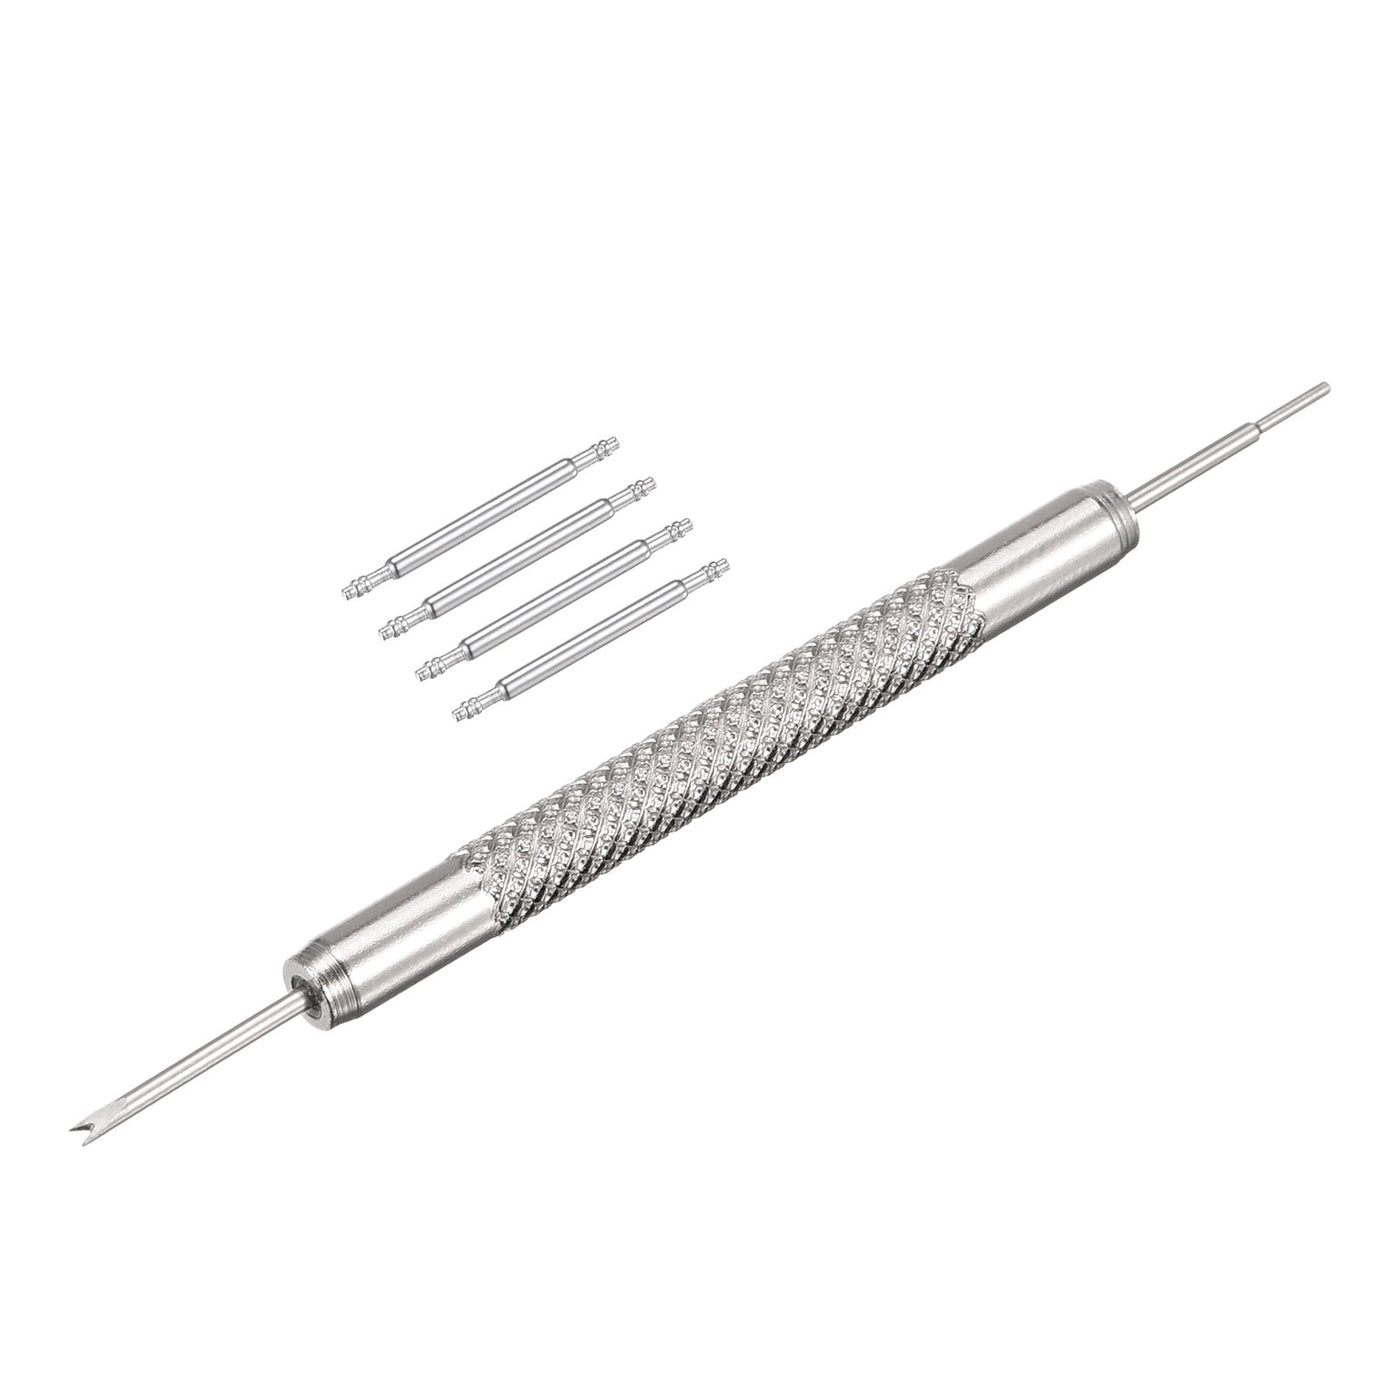 Uxcell Uxcell Stainless Steel 22mm Watch Spring Bars 4Pcs with Dia 1.5mm Spring Bar Removal